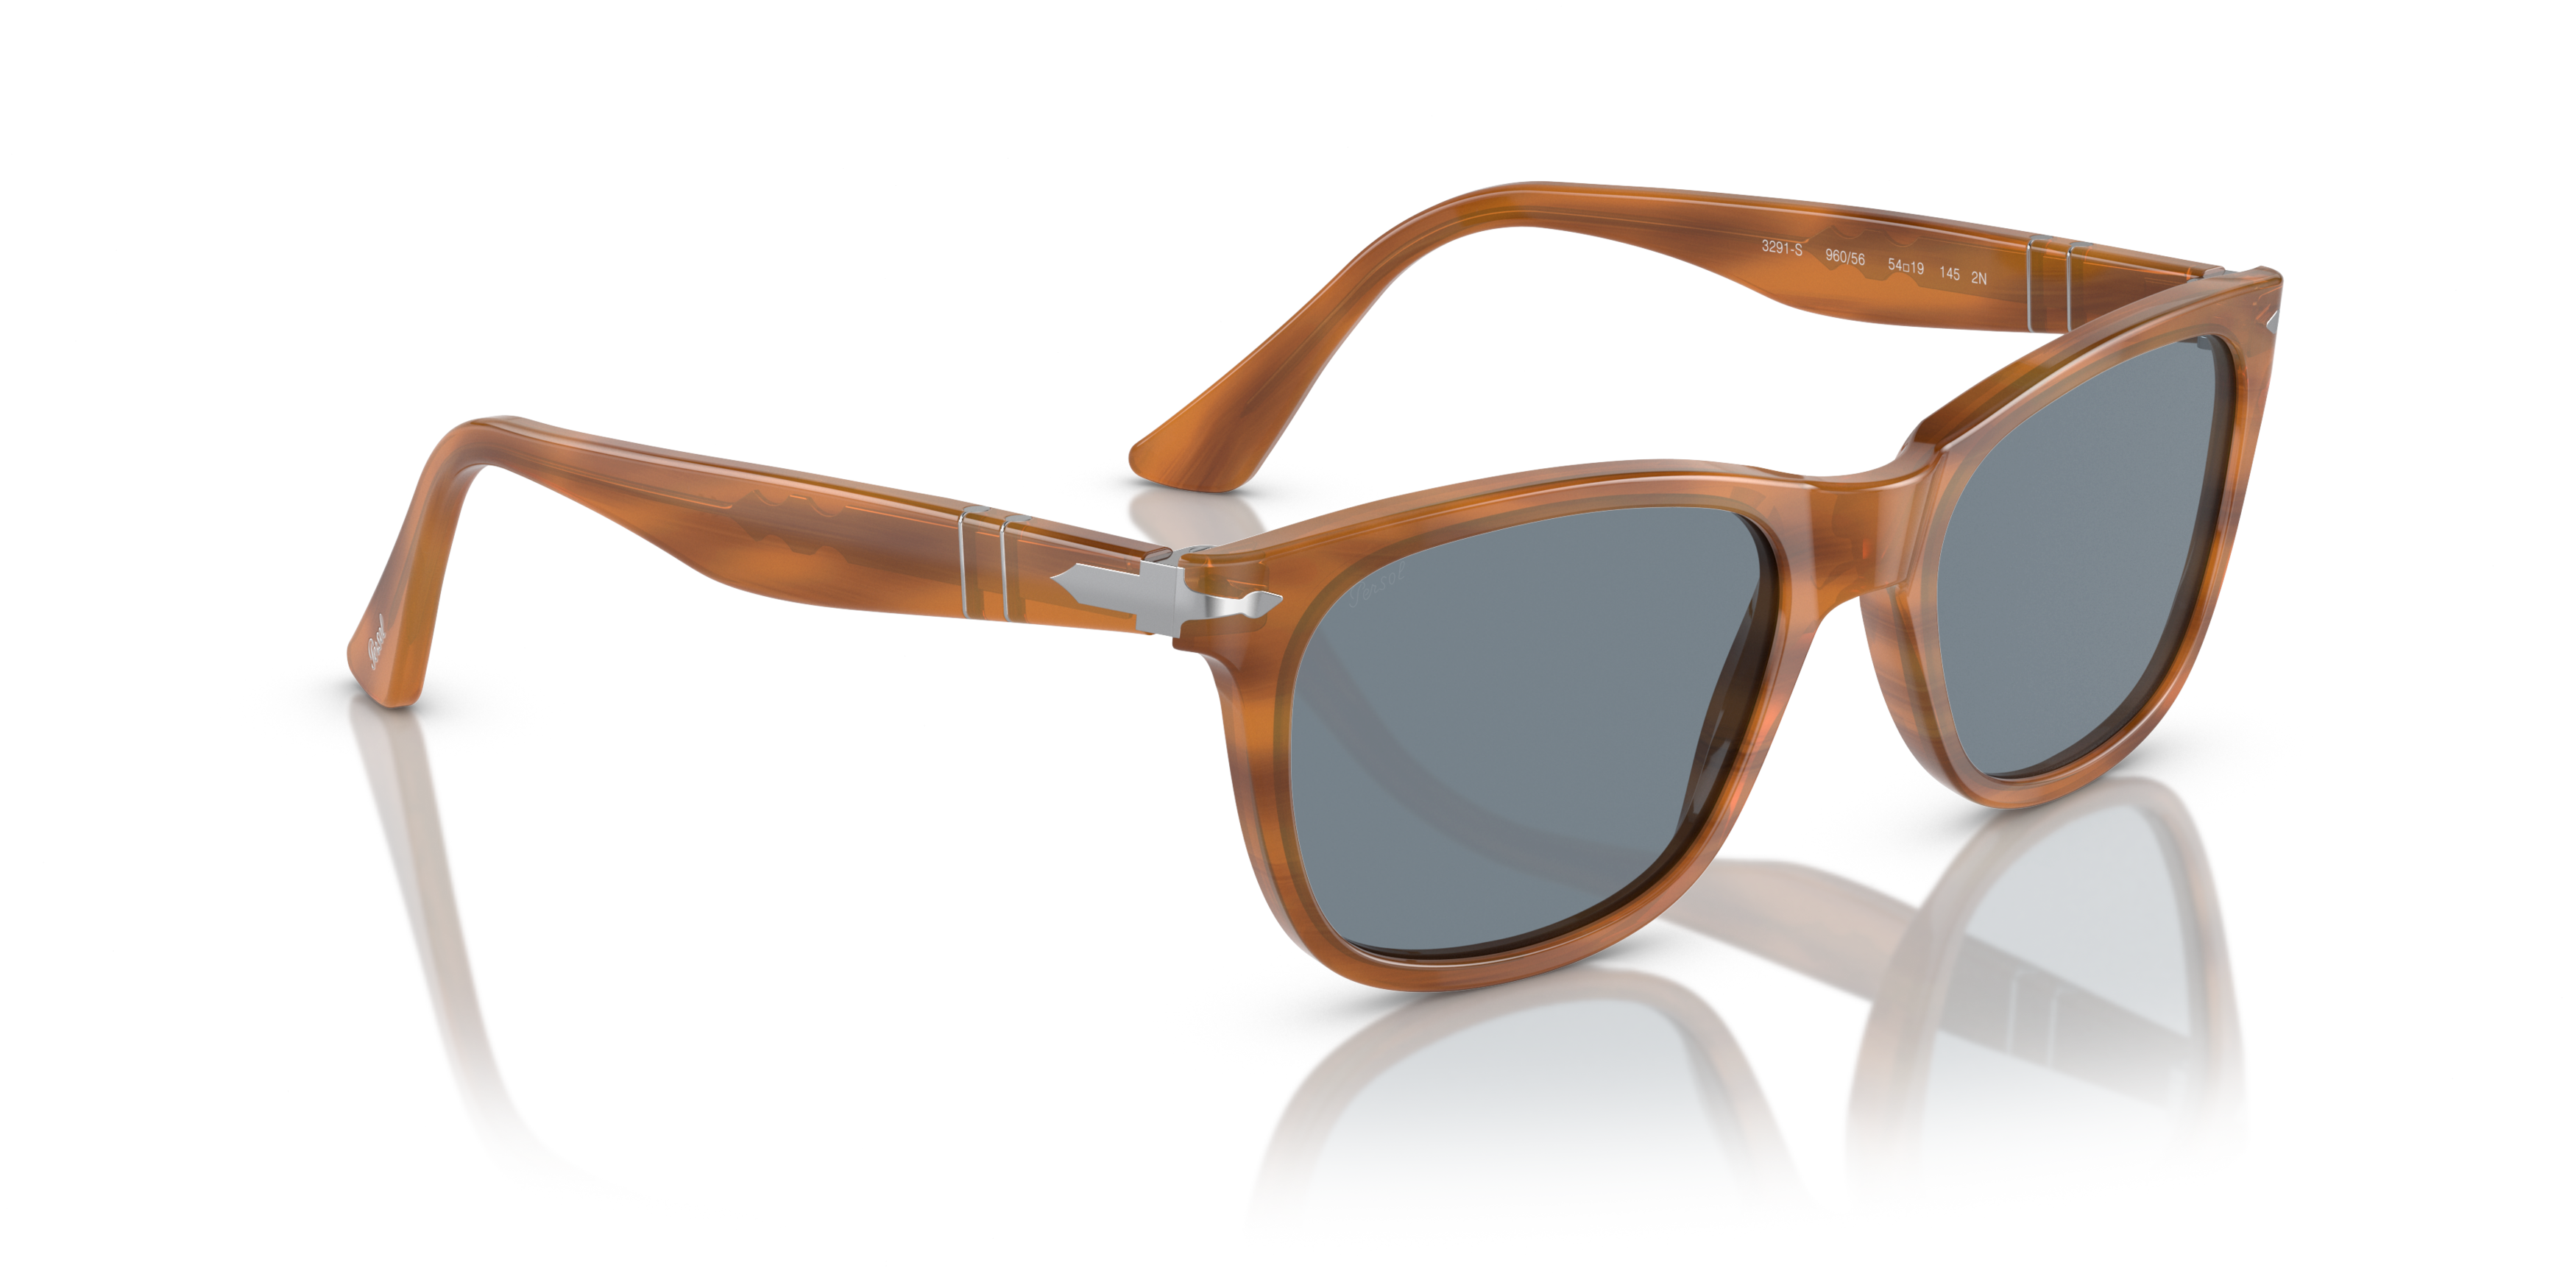 [products.image.angle_right01] Persol 0PO3291S 960/56 Solbriller